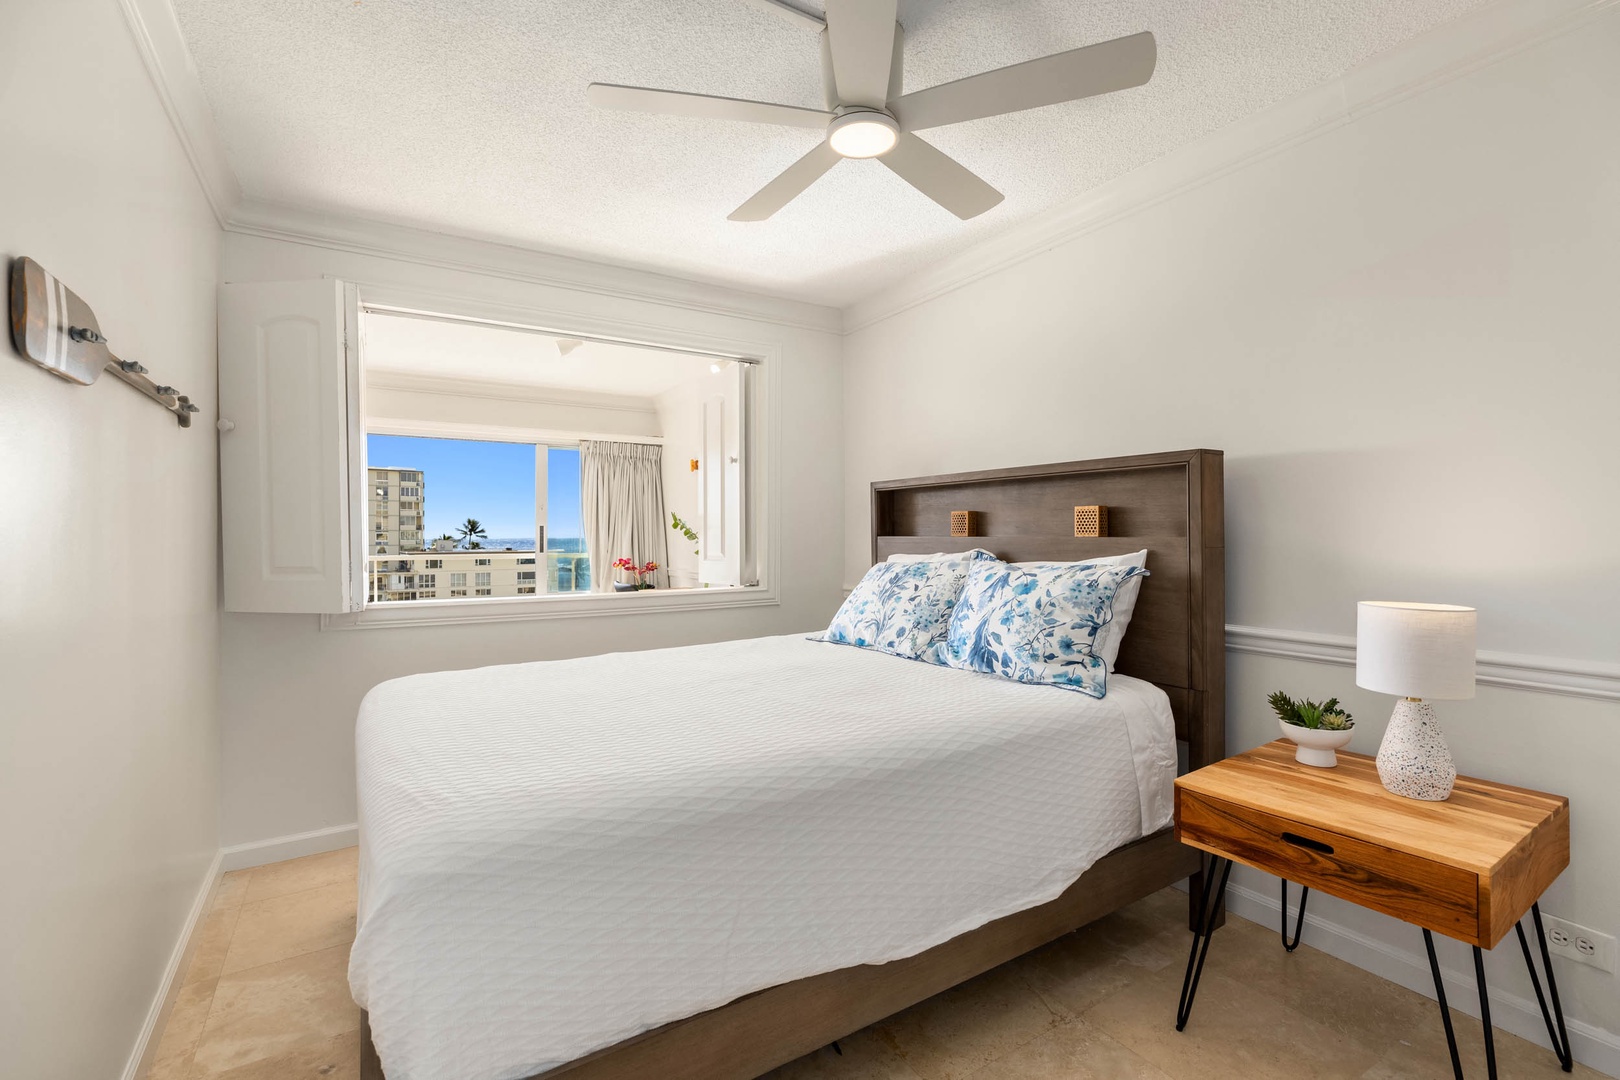 Honolulu Vacation Rentals, Colony Surf Getaway - Cozy primary bedroom with plush bedding and scenic city views, designed for restful nights.